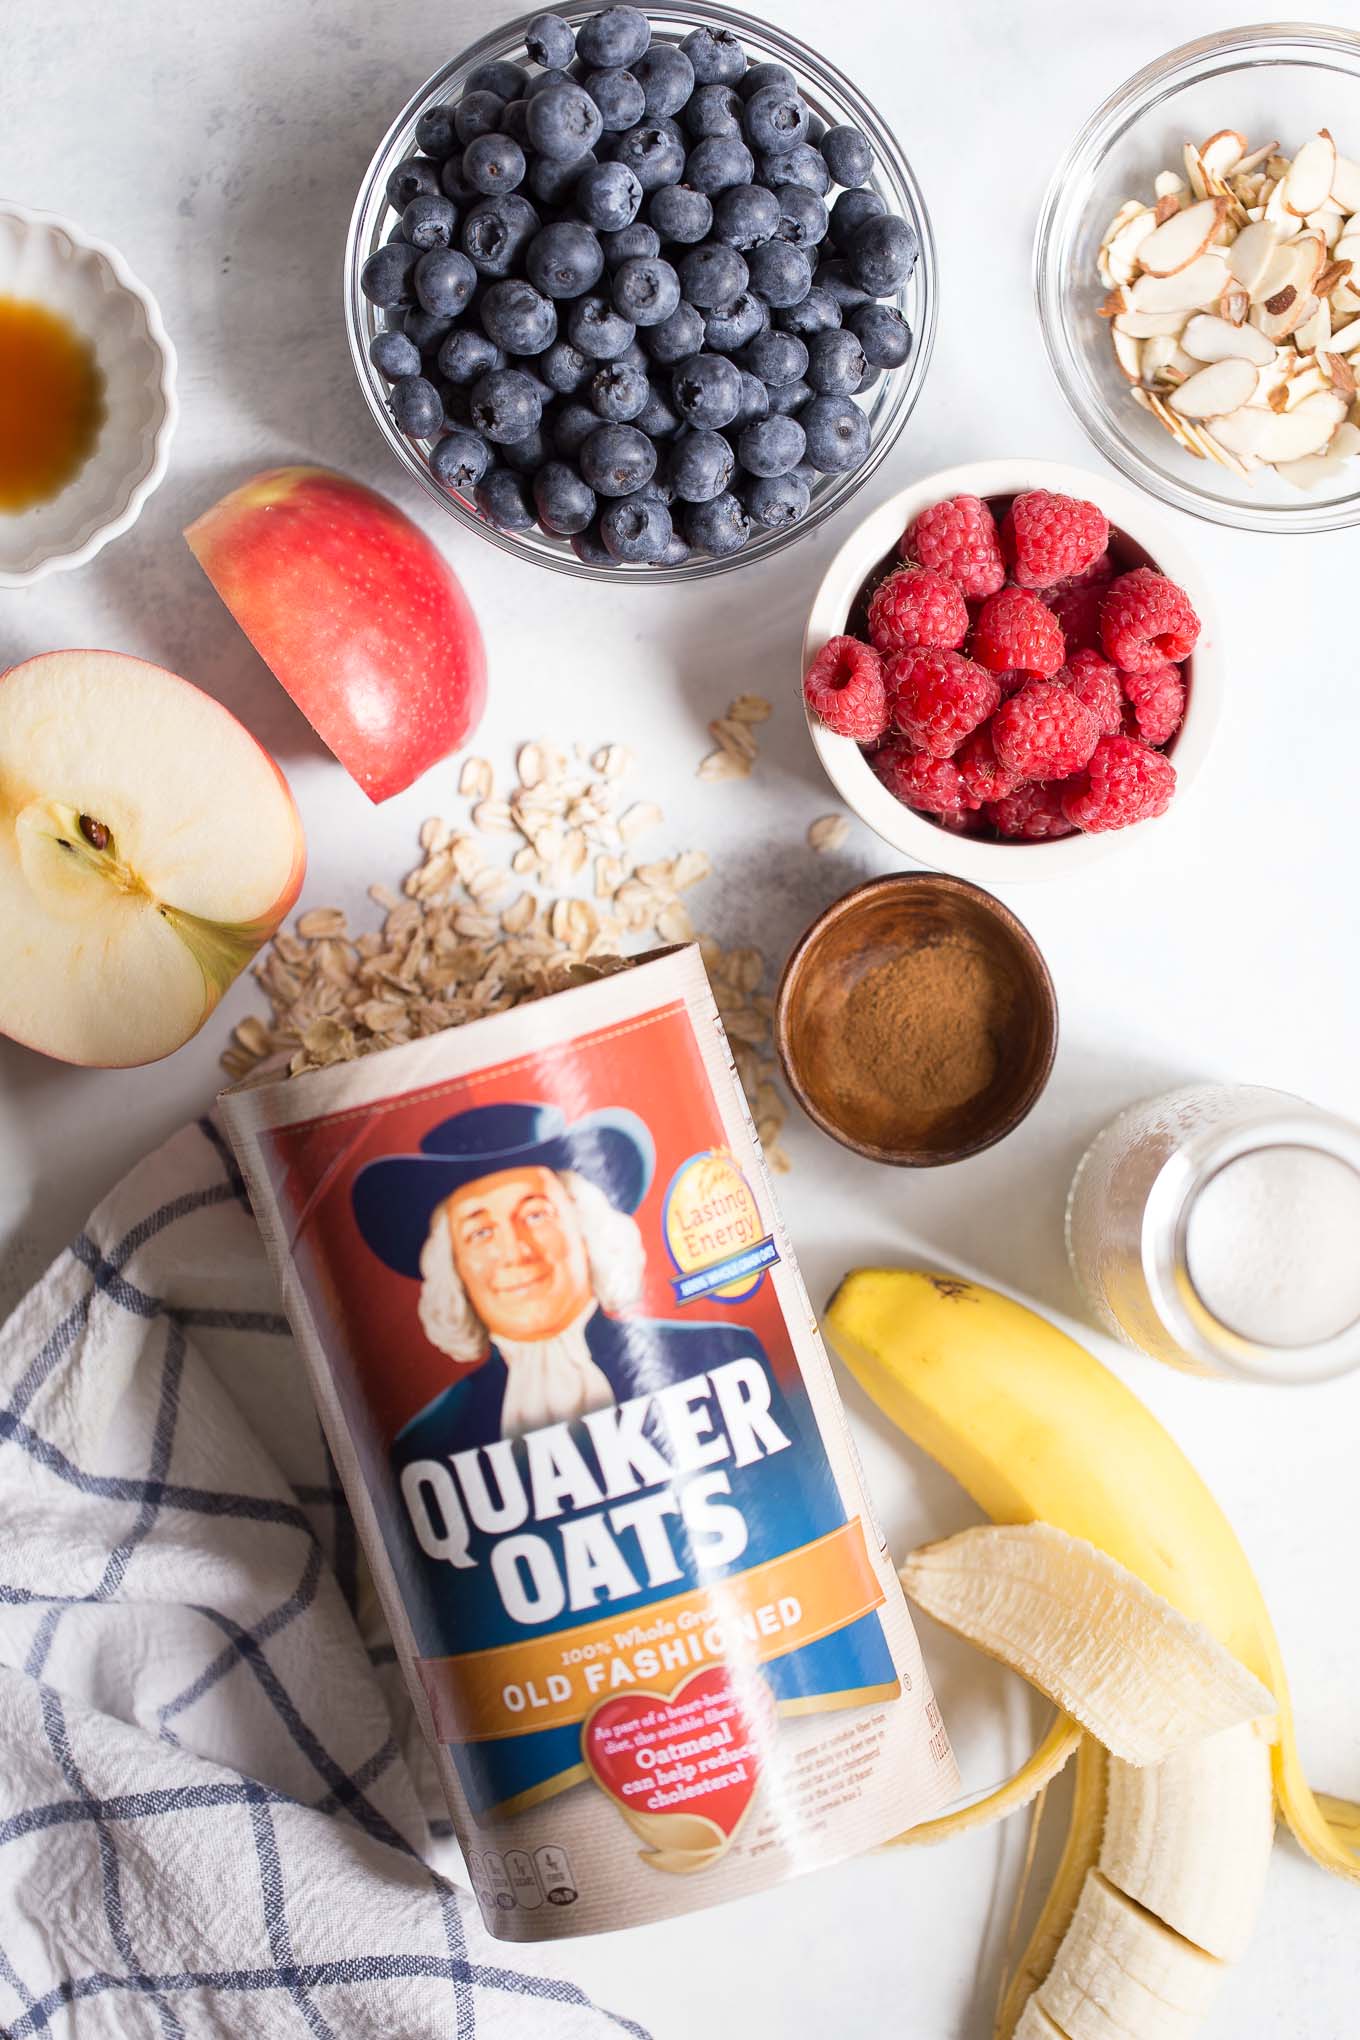 Slow Cooker Oatmeal Recipe - Here's how to make slow cooker oatmeal with old fashioned oats and 3 delicious variations: apple crisp, peanut butter banana, berry crunch